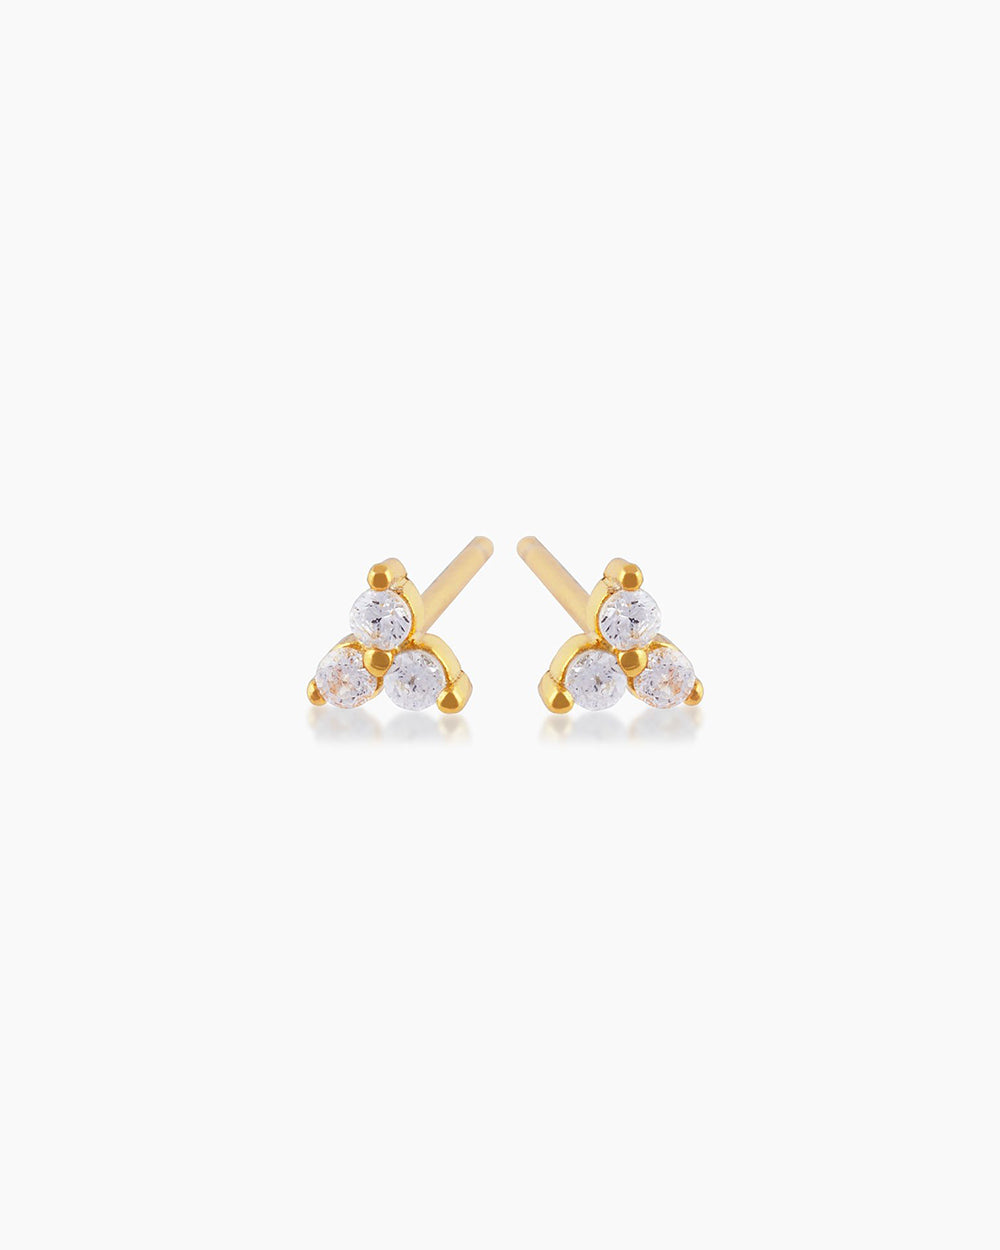 The Trina Studs, gold stud earrings featuring a trio of sparkling cubic zirconia crystals